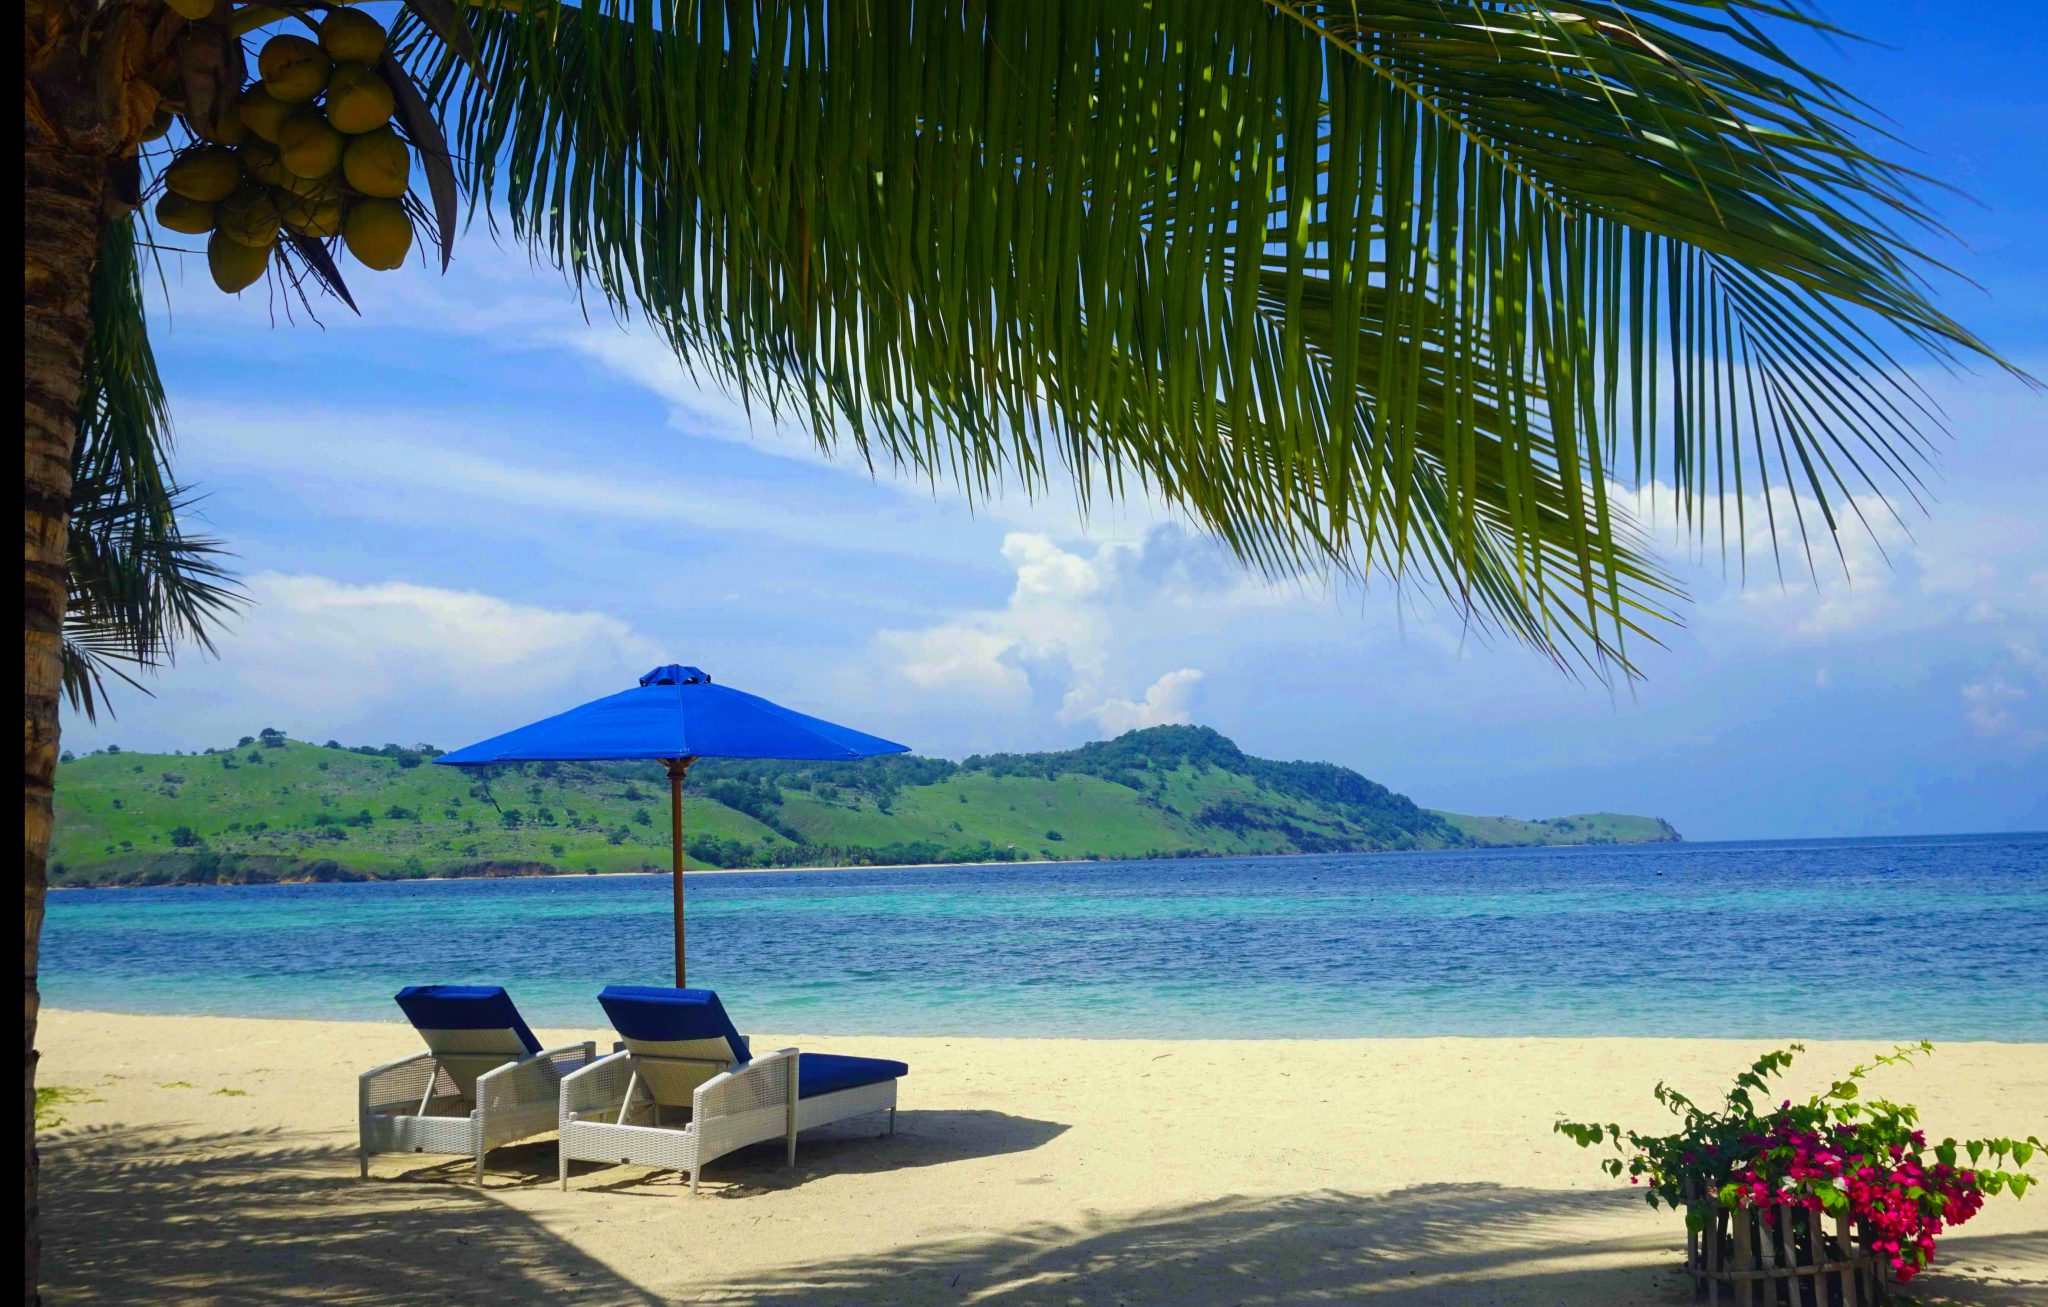 Day Bed - Komodo National Park - Indonesia - White Sand Beach - Blue Water